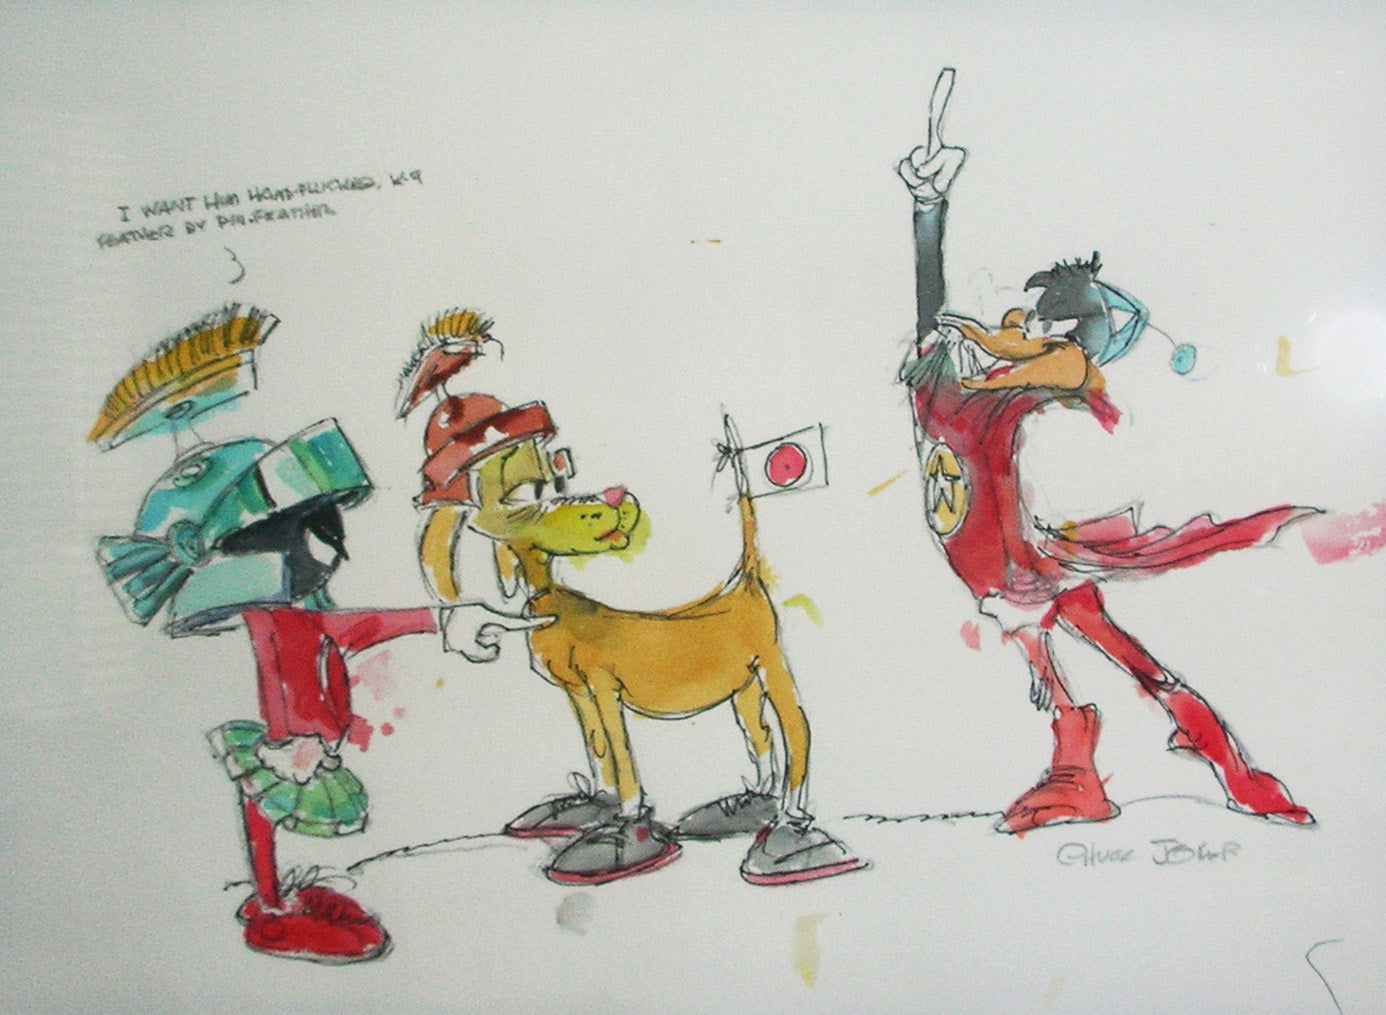 Original Chuck Jones Water Color, "I Want Him Handplucked, K-9 Feather by Pin-Feather"